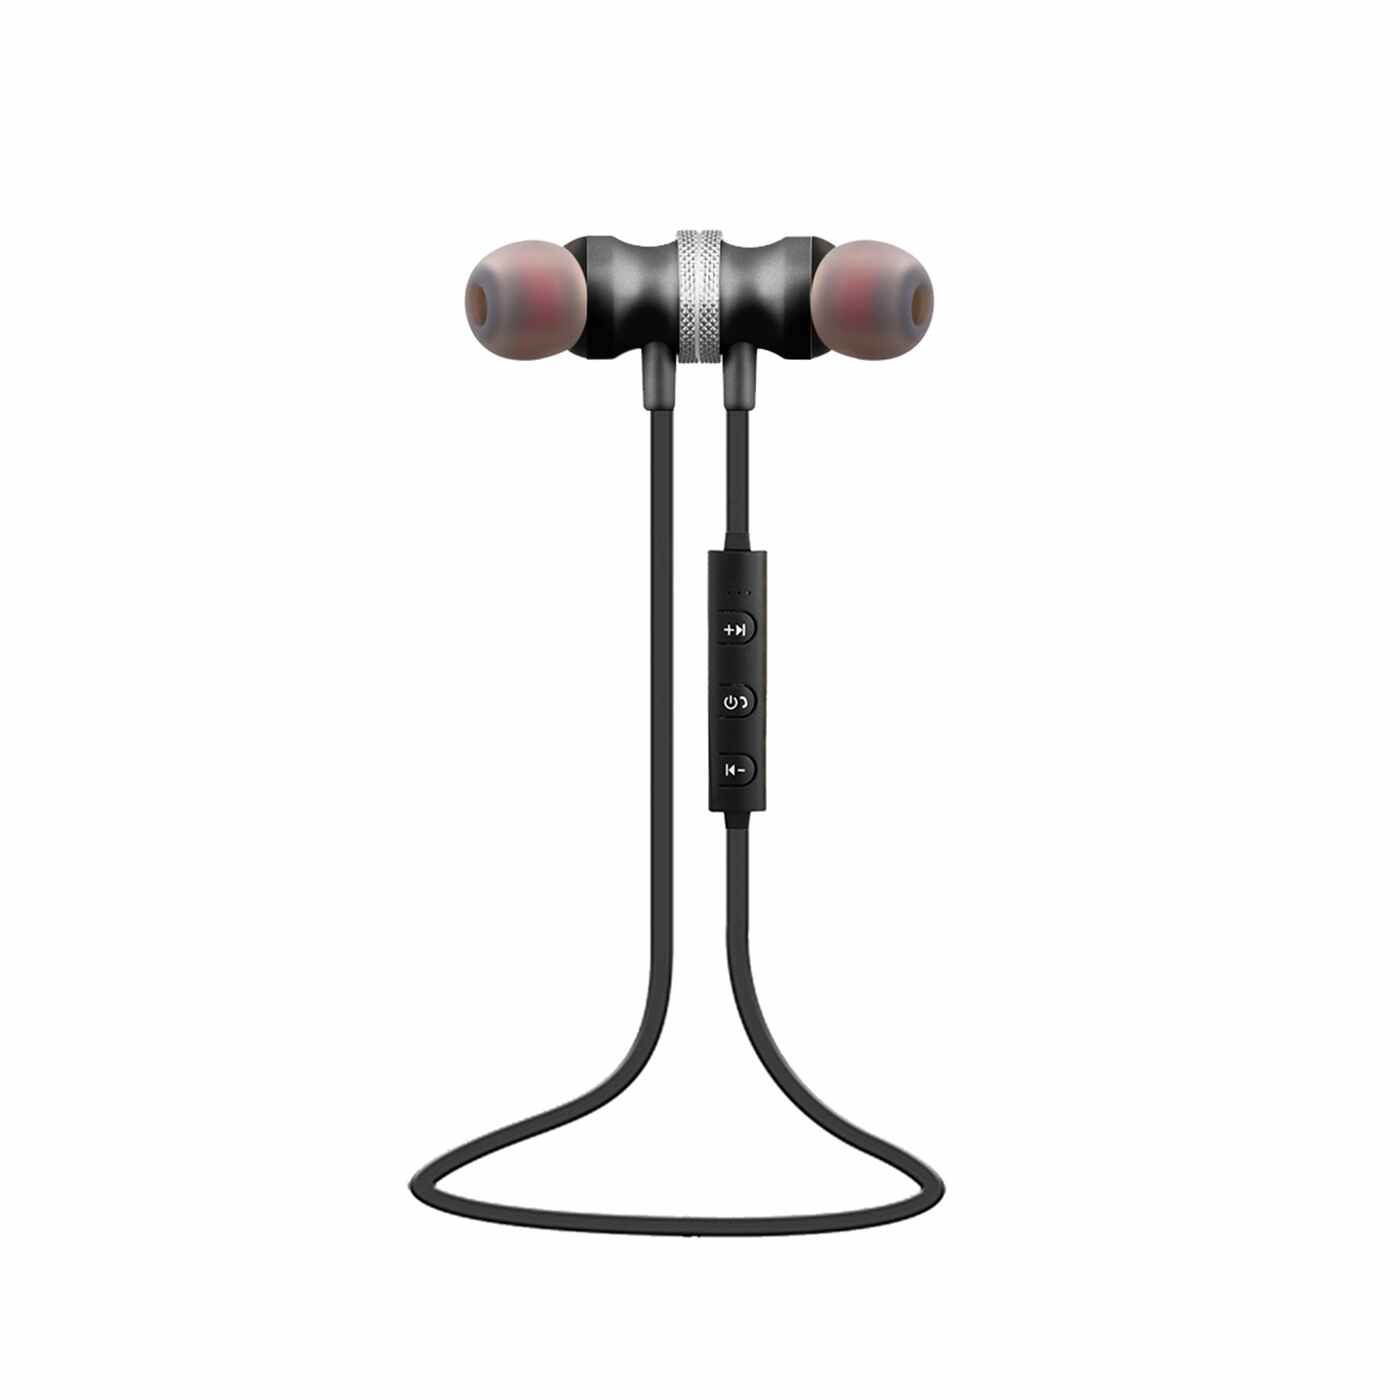 N900 Bluetooth Magentic Stereo Earbuds In Black